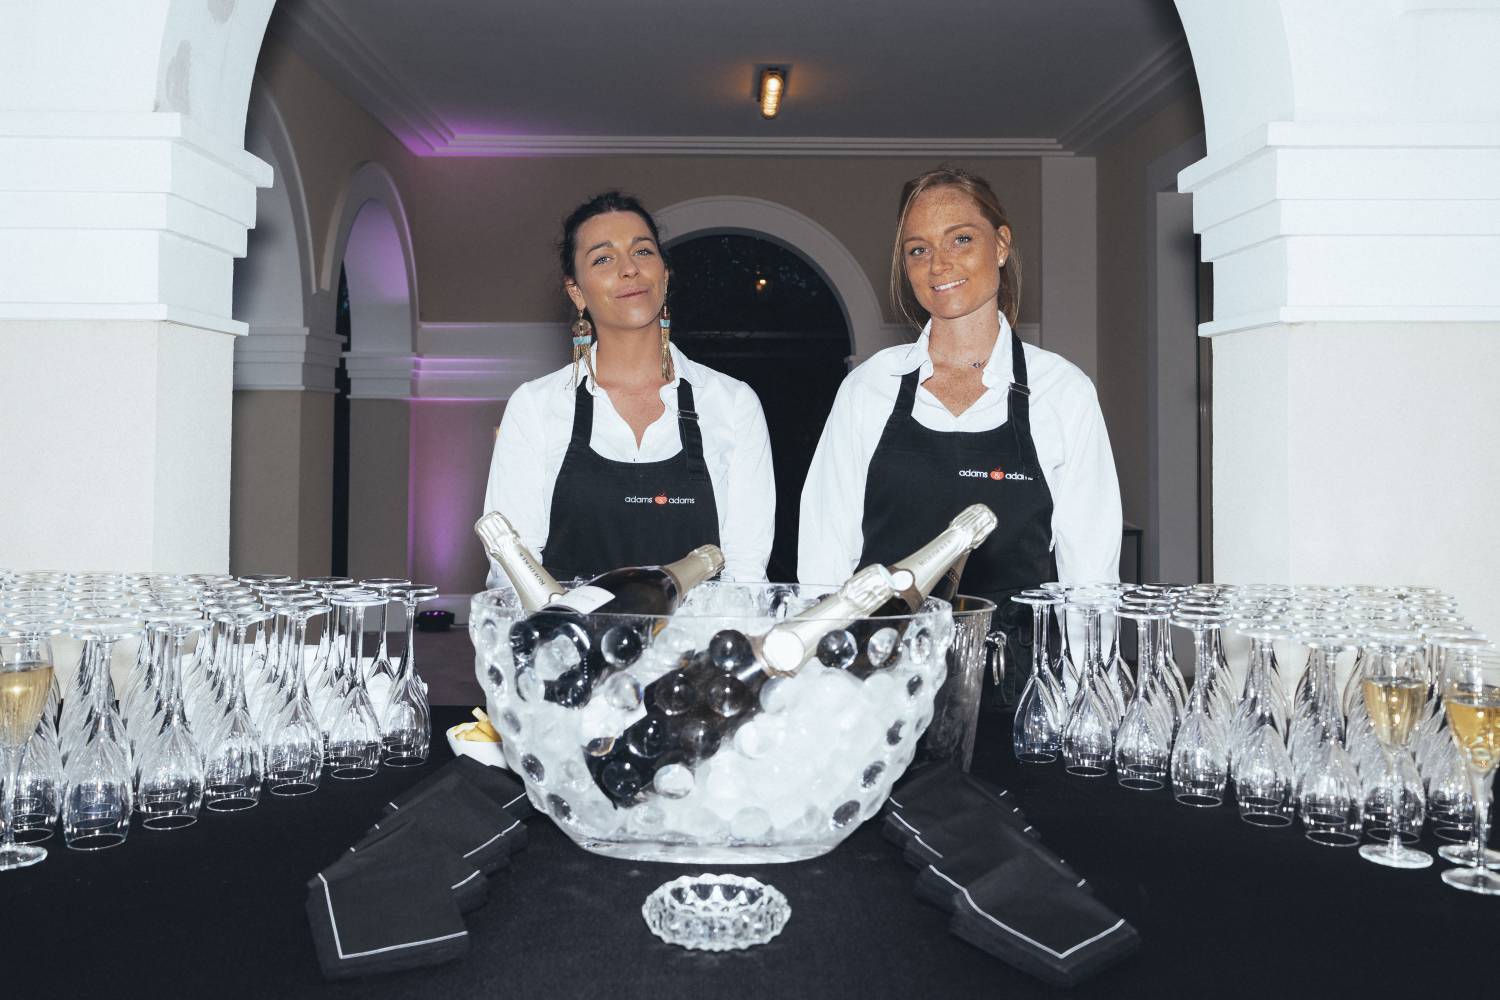 Adams-adams-staff-catering-south-of-france